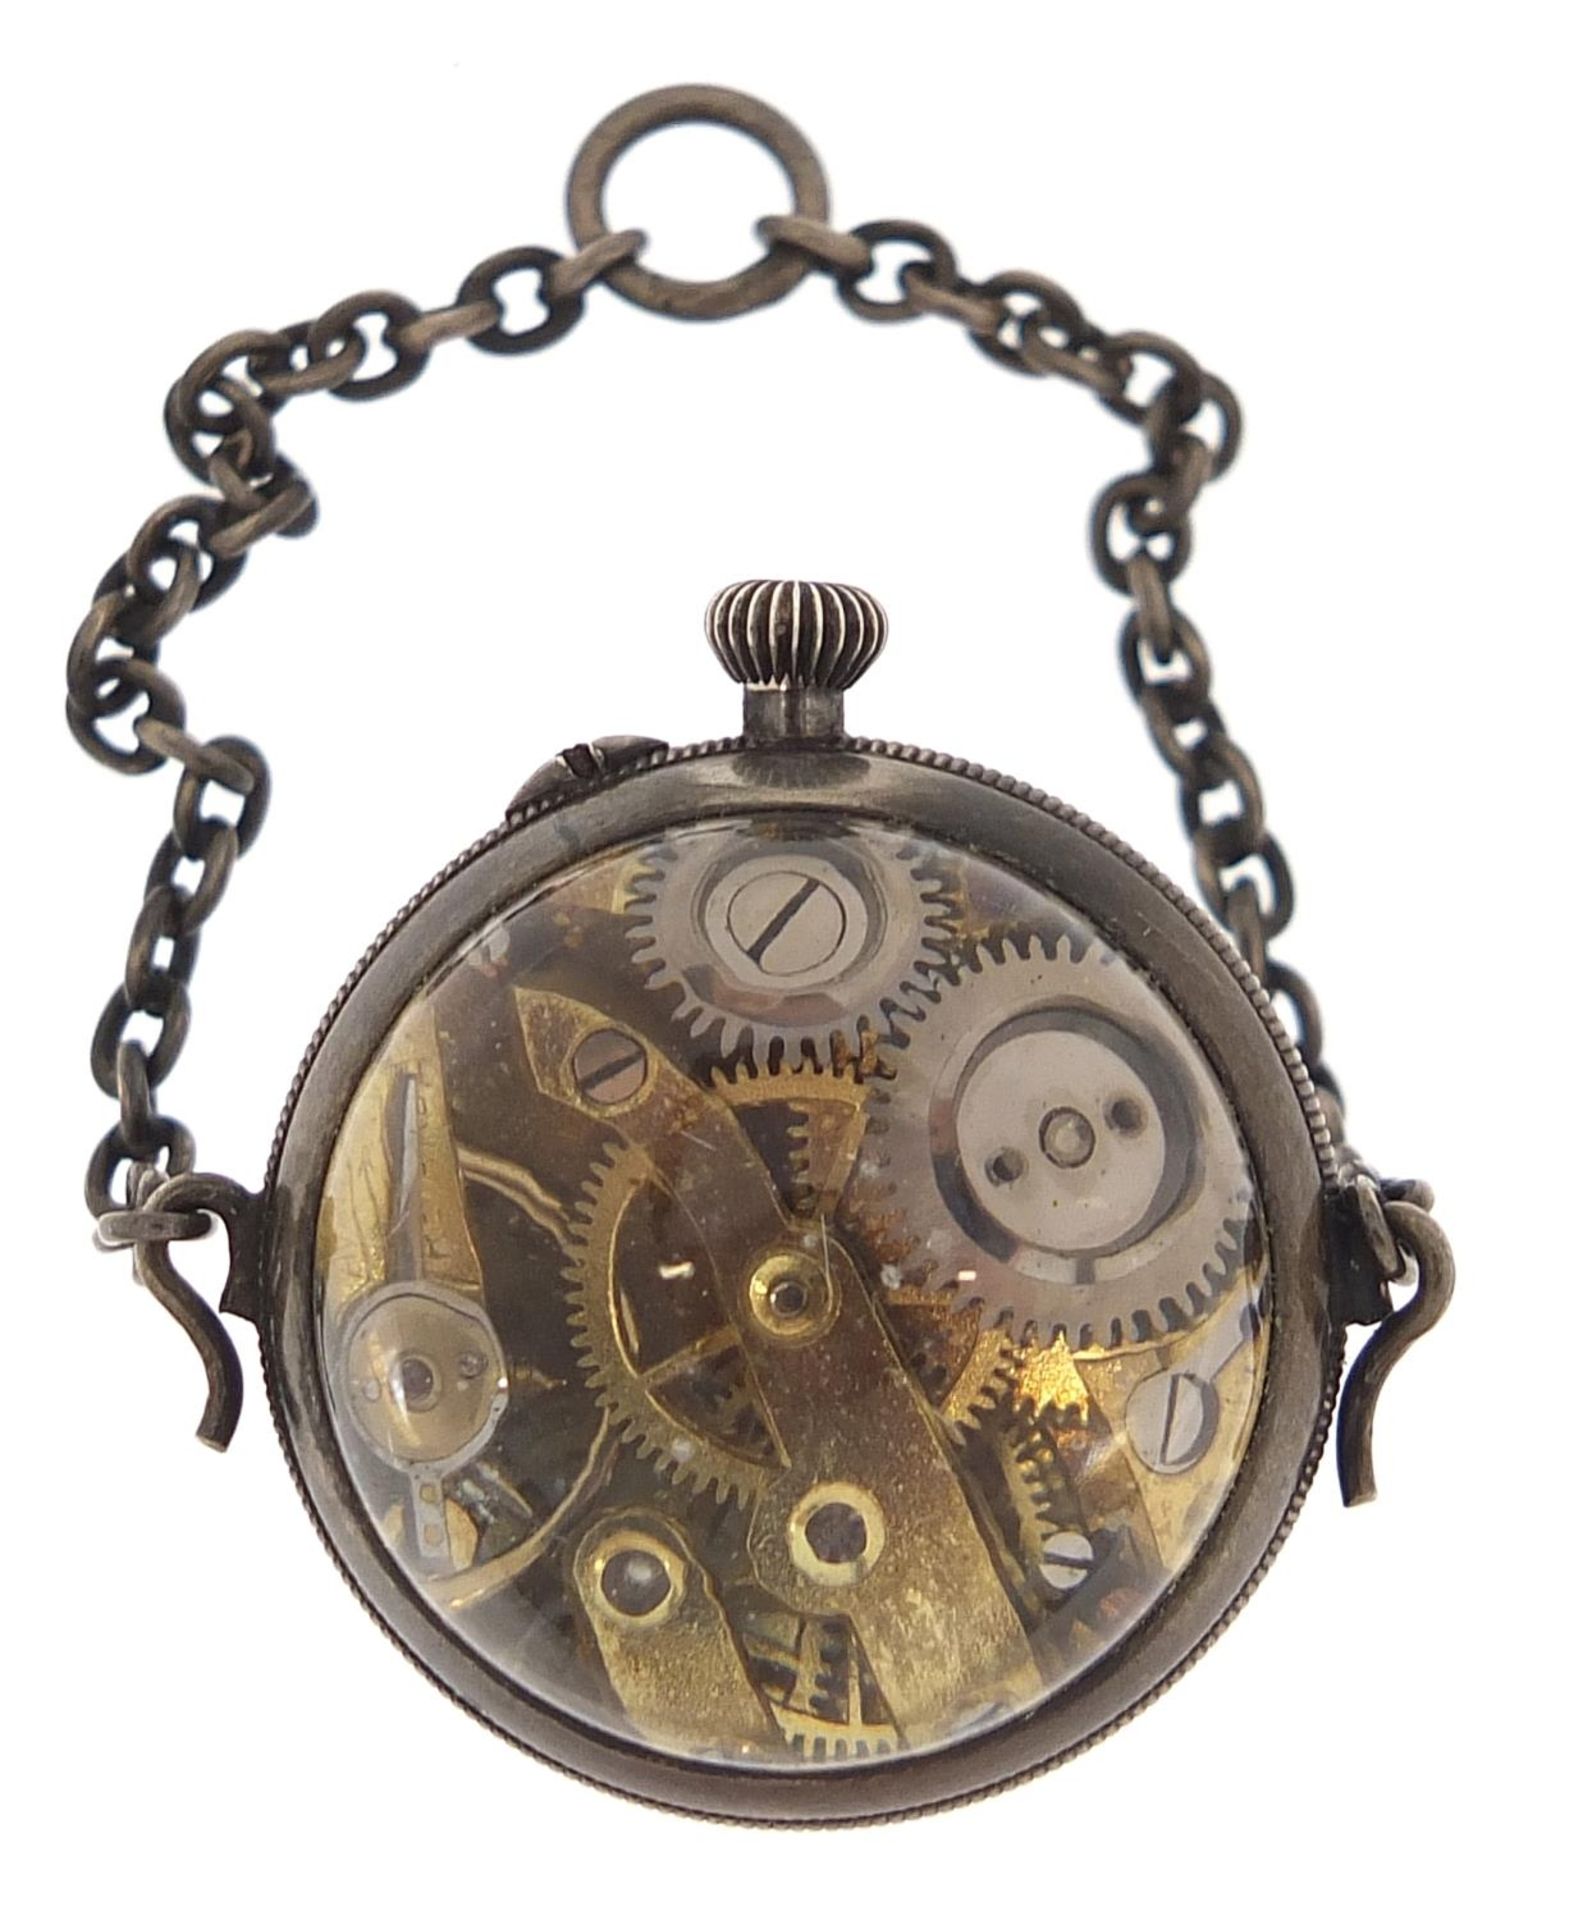 Globular silver coloured metal and glass pocket watch, 2.5cm in diameter - Image 3 of 3